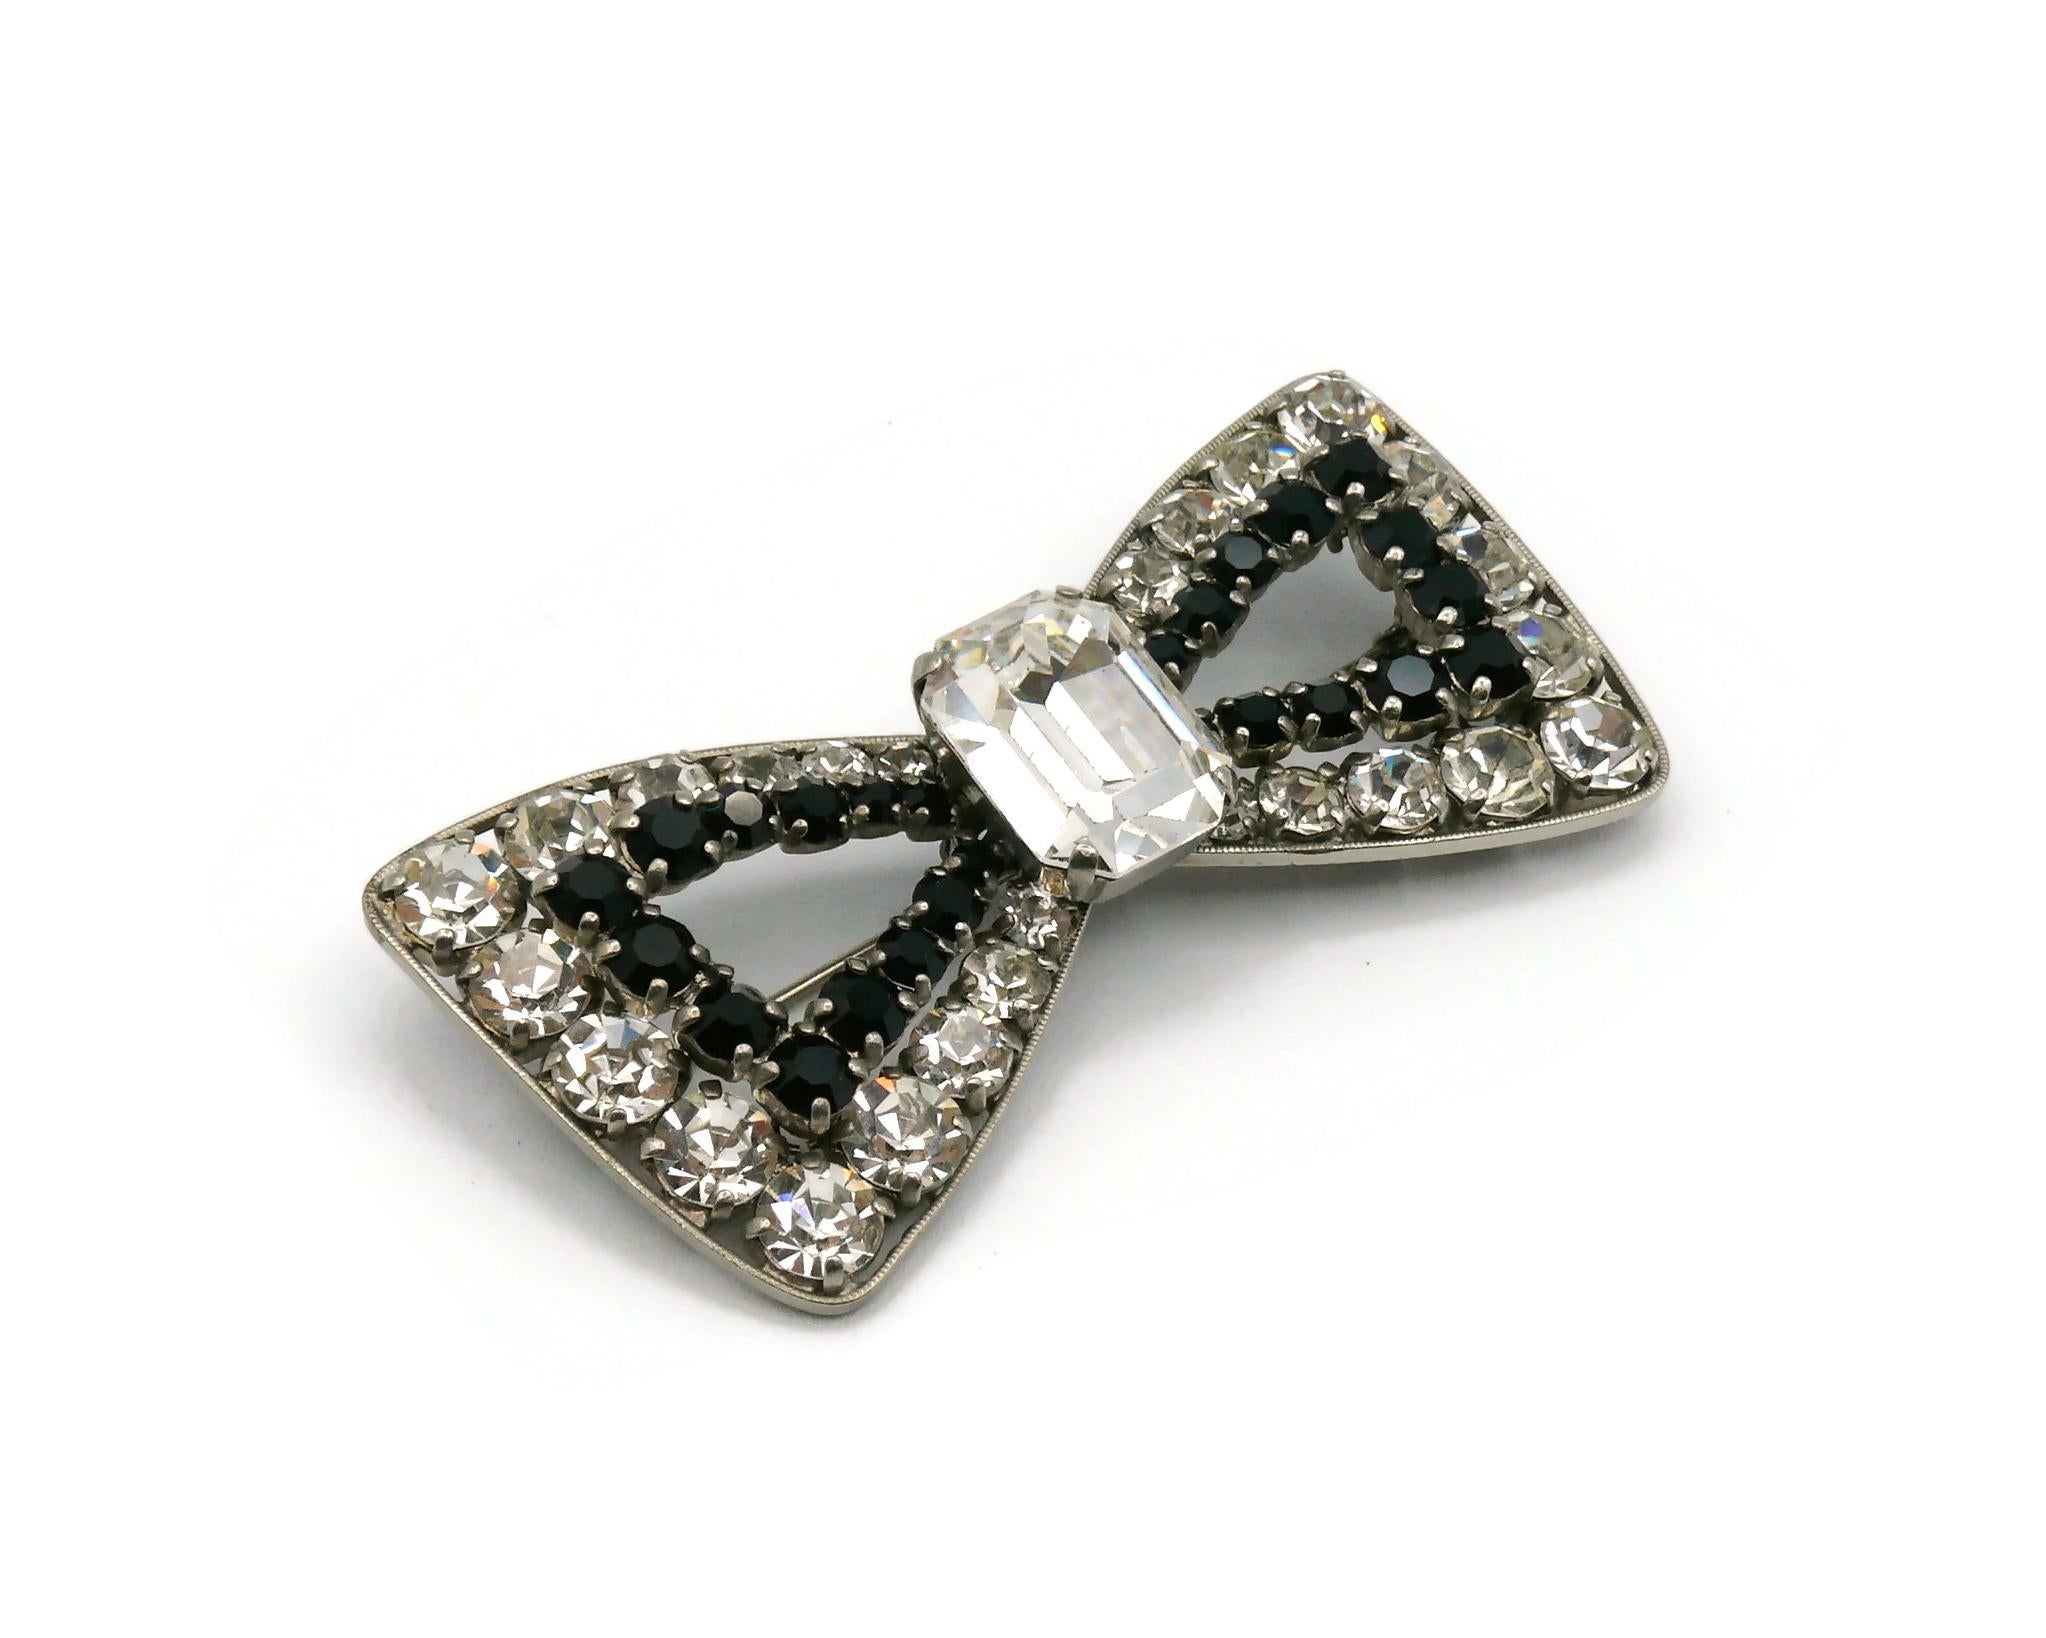 YVES SAINT LAURENT vintage bow brooch embellished with black and clear crystals.

Silver tone metal hardware.

Embossed YSL.

Indicative measurements : max. height approx. 3.6 cm (1.42 inches) / max. width approx. 7.2 cm (2.83 inches).

NOTES
- This